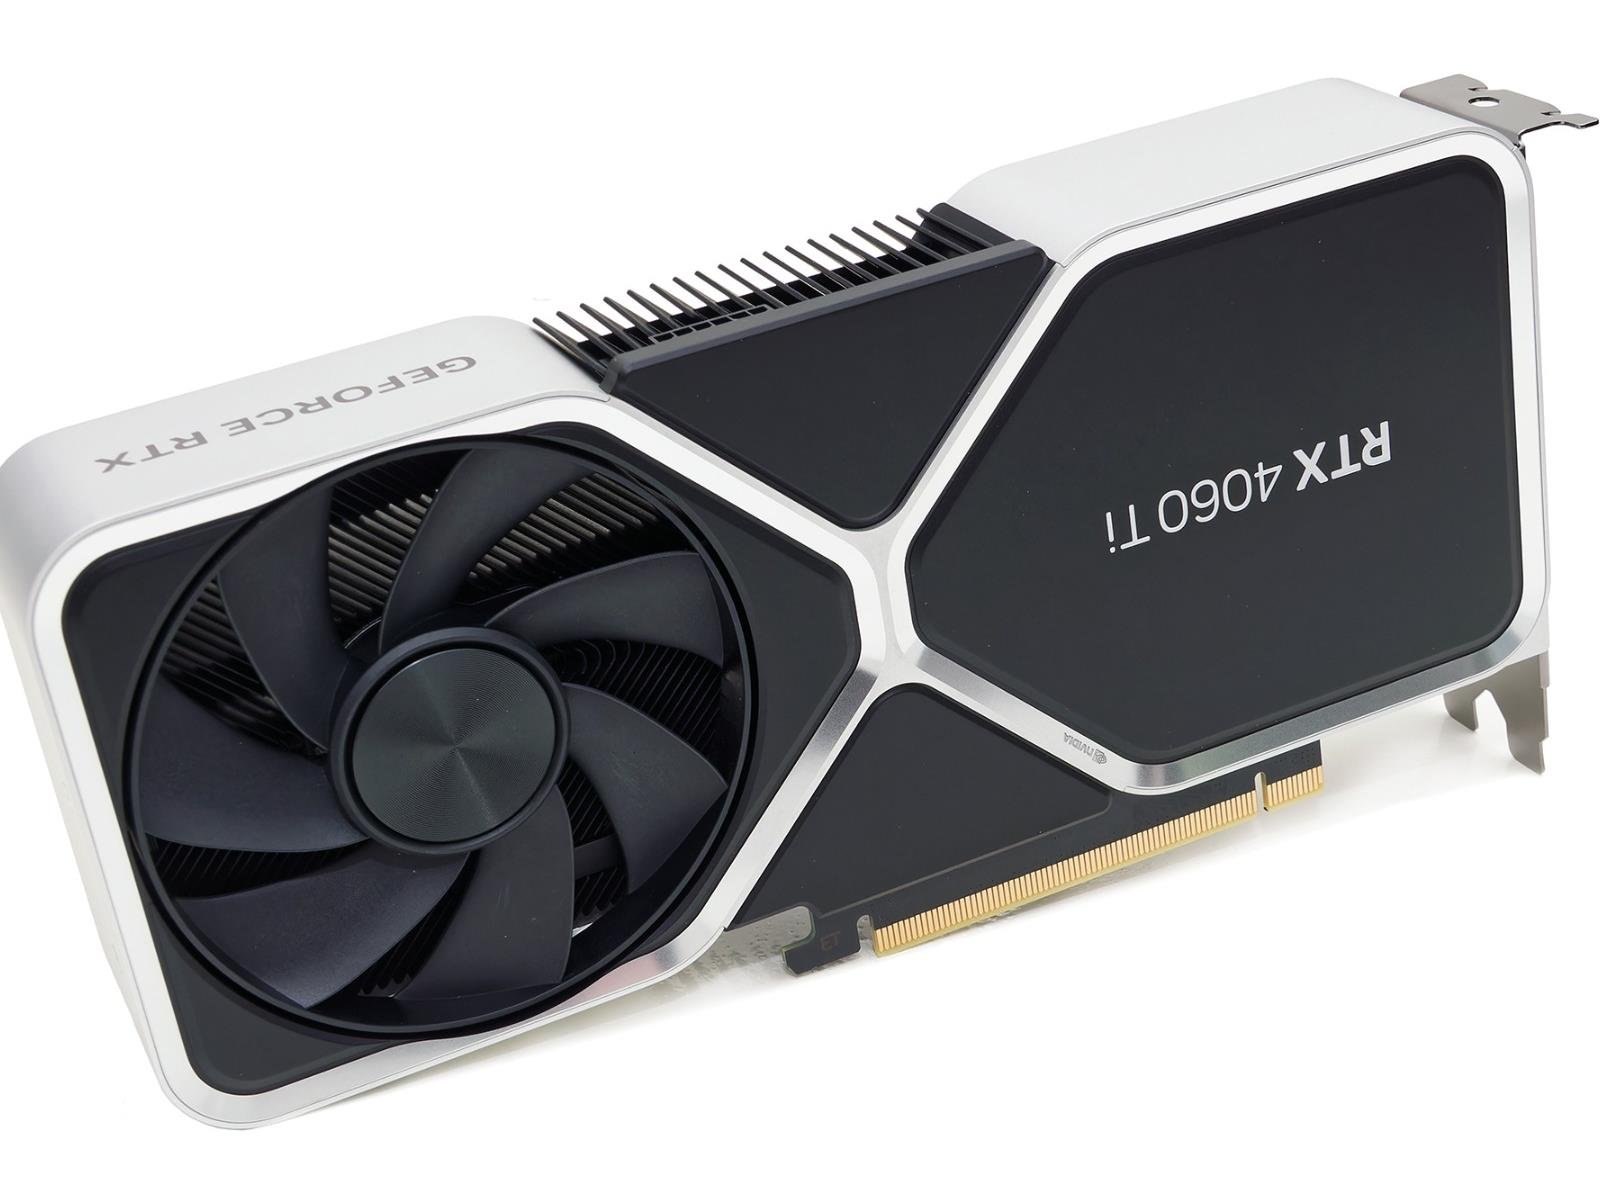 Nvidia GeForce RTX 4060: the best midrange graphics card for the masses